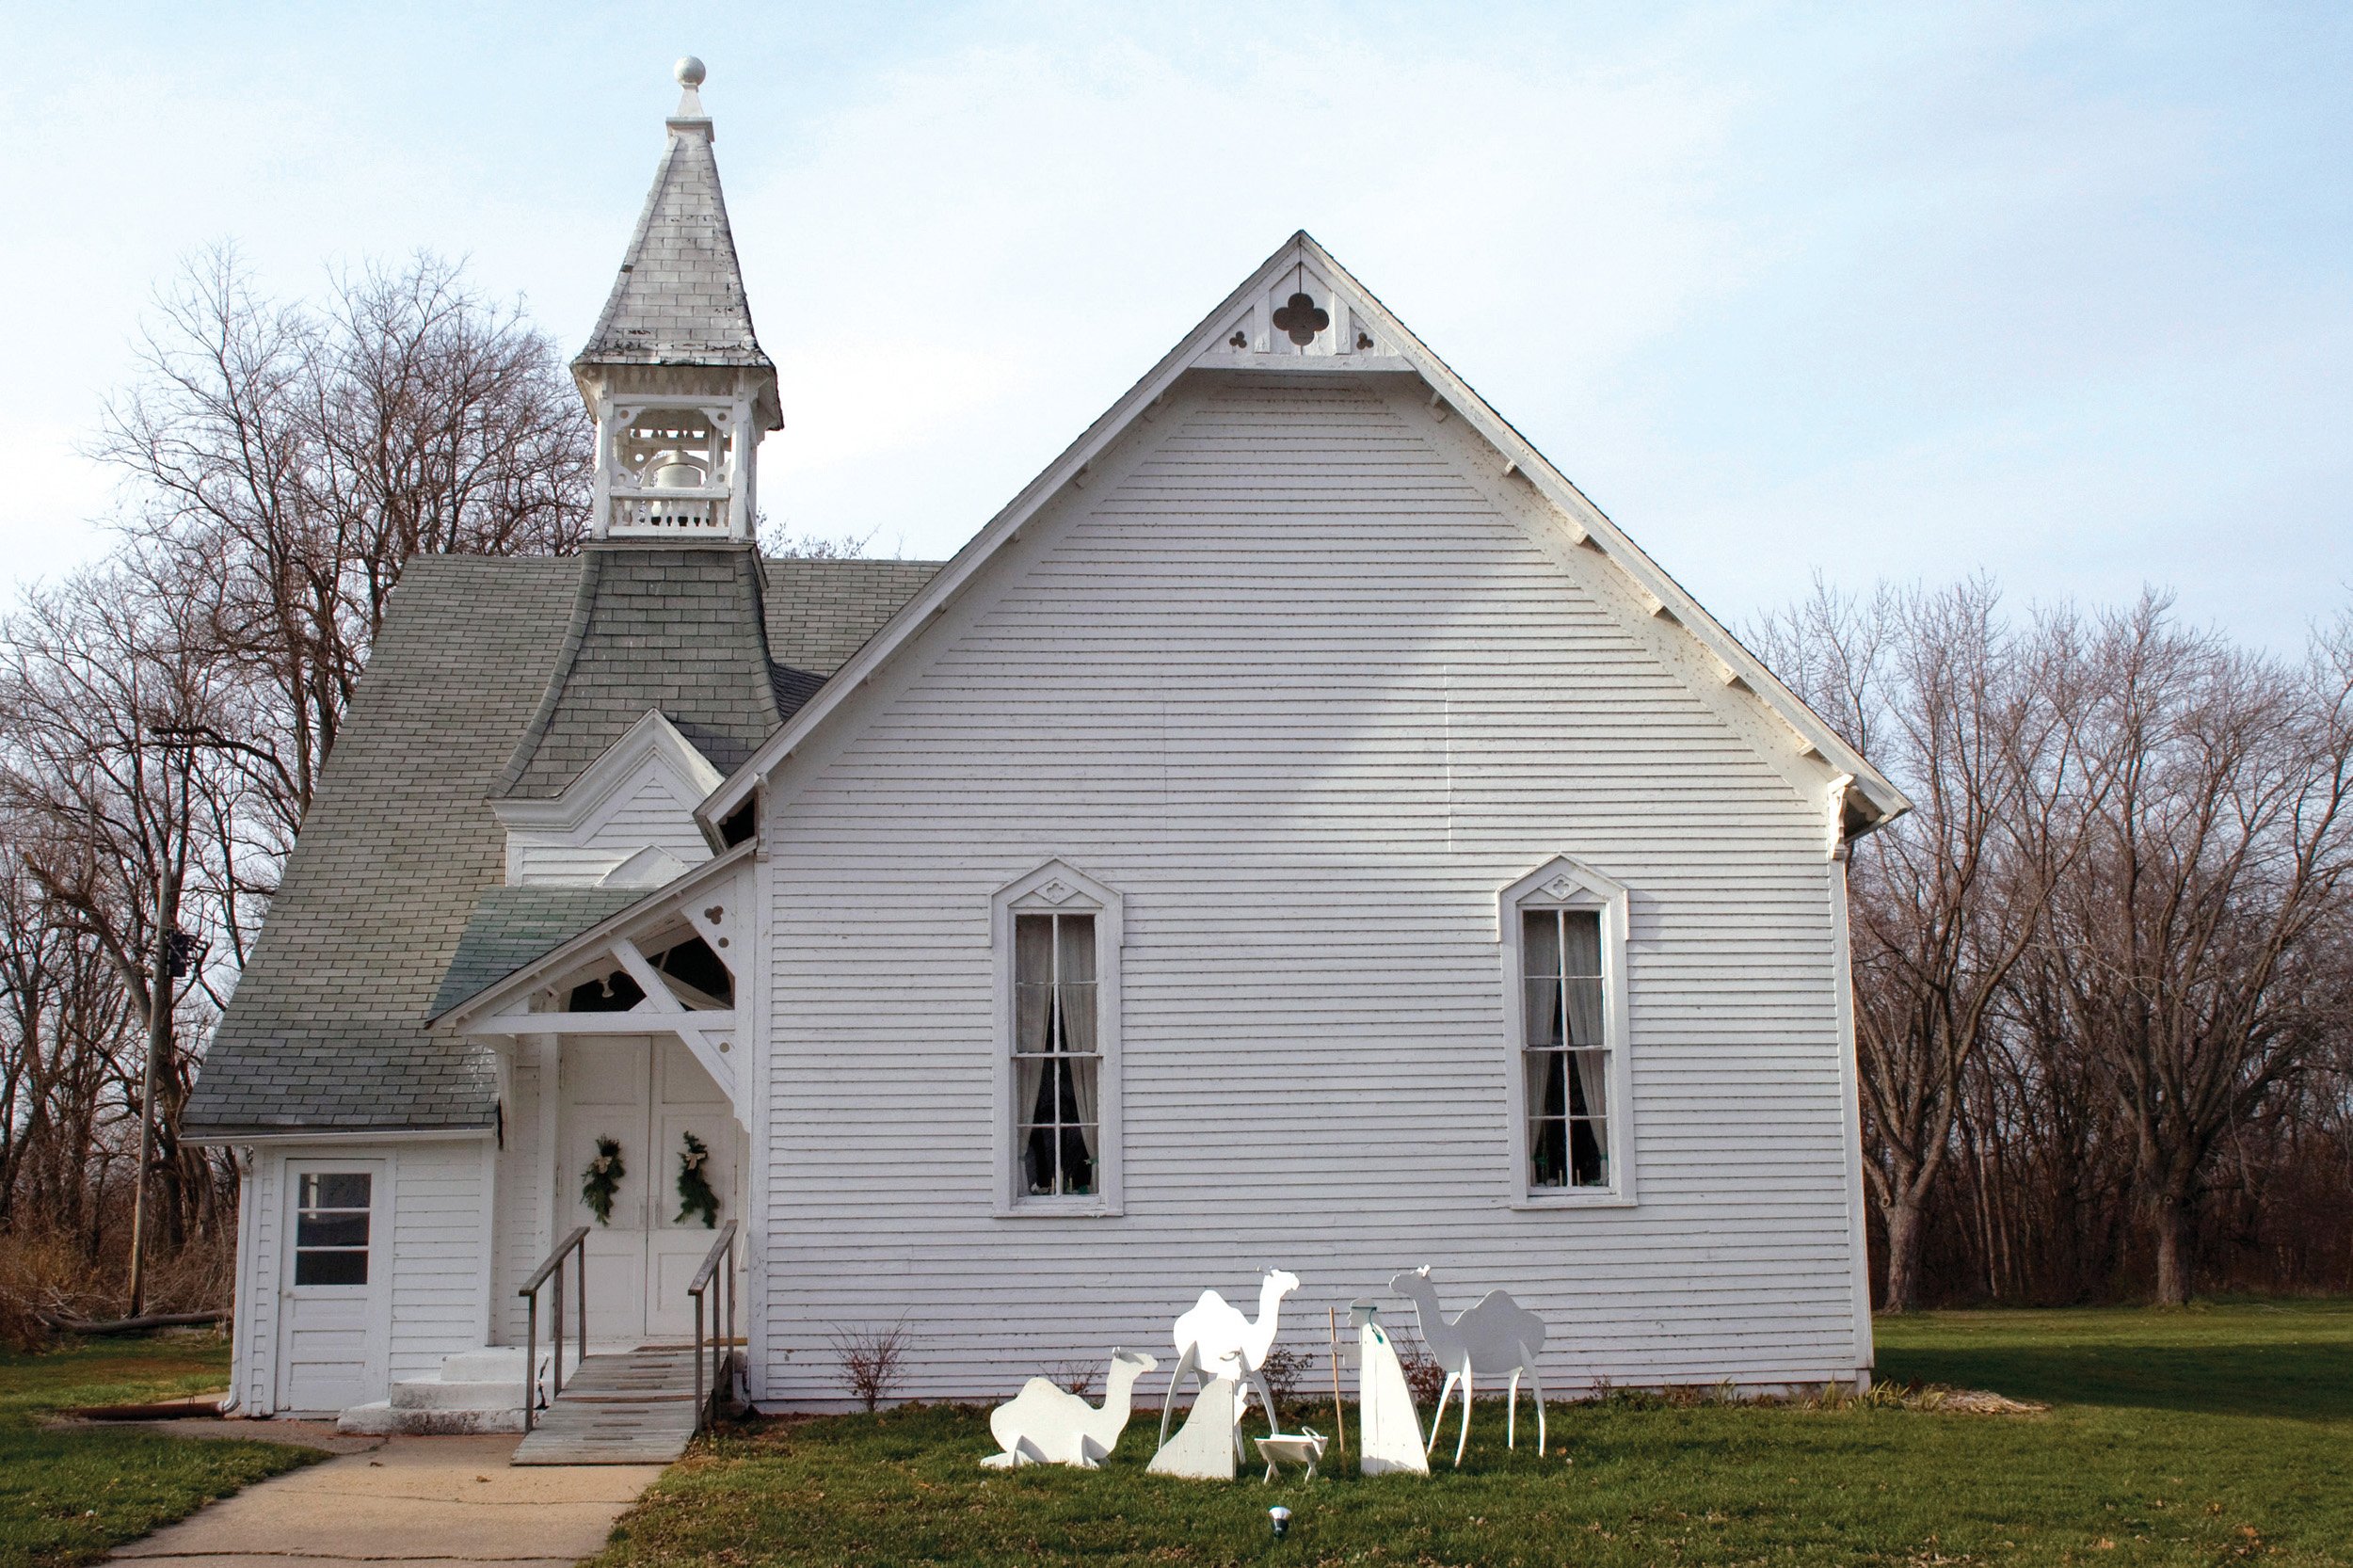  Exterior view of the Methodist Church at Christmas. Brooklyn, IL. Dec. 2012 